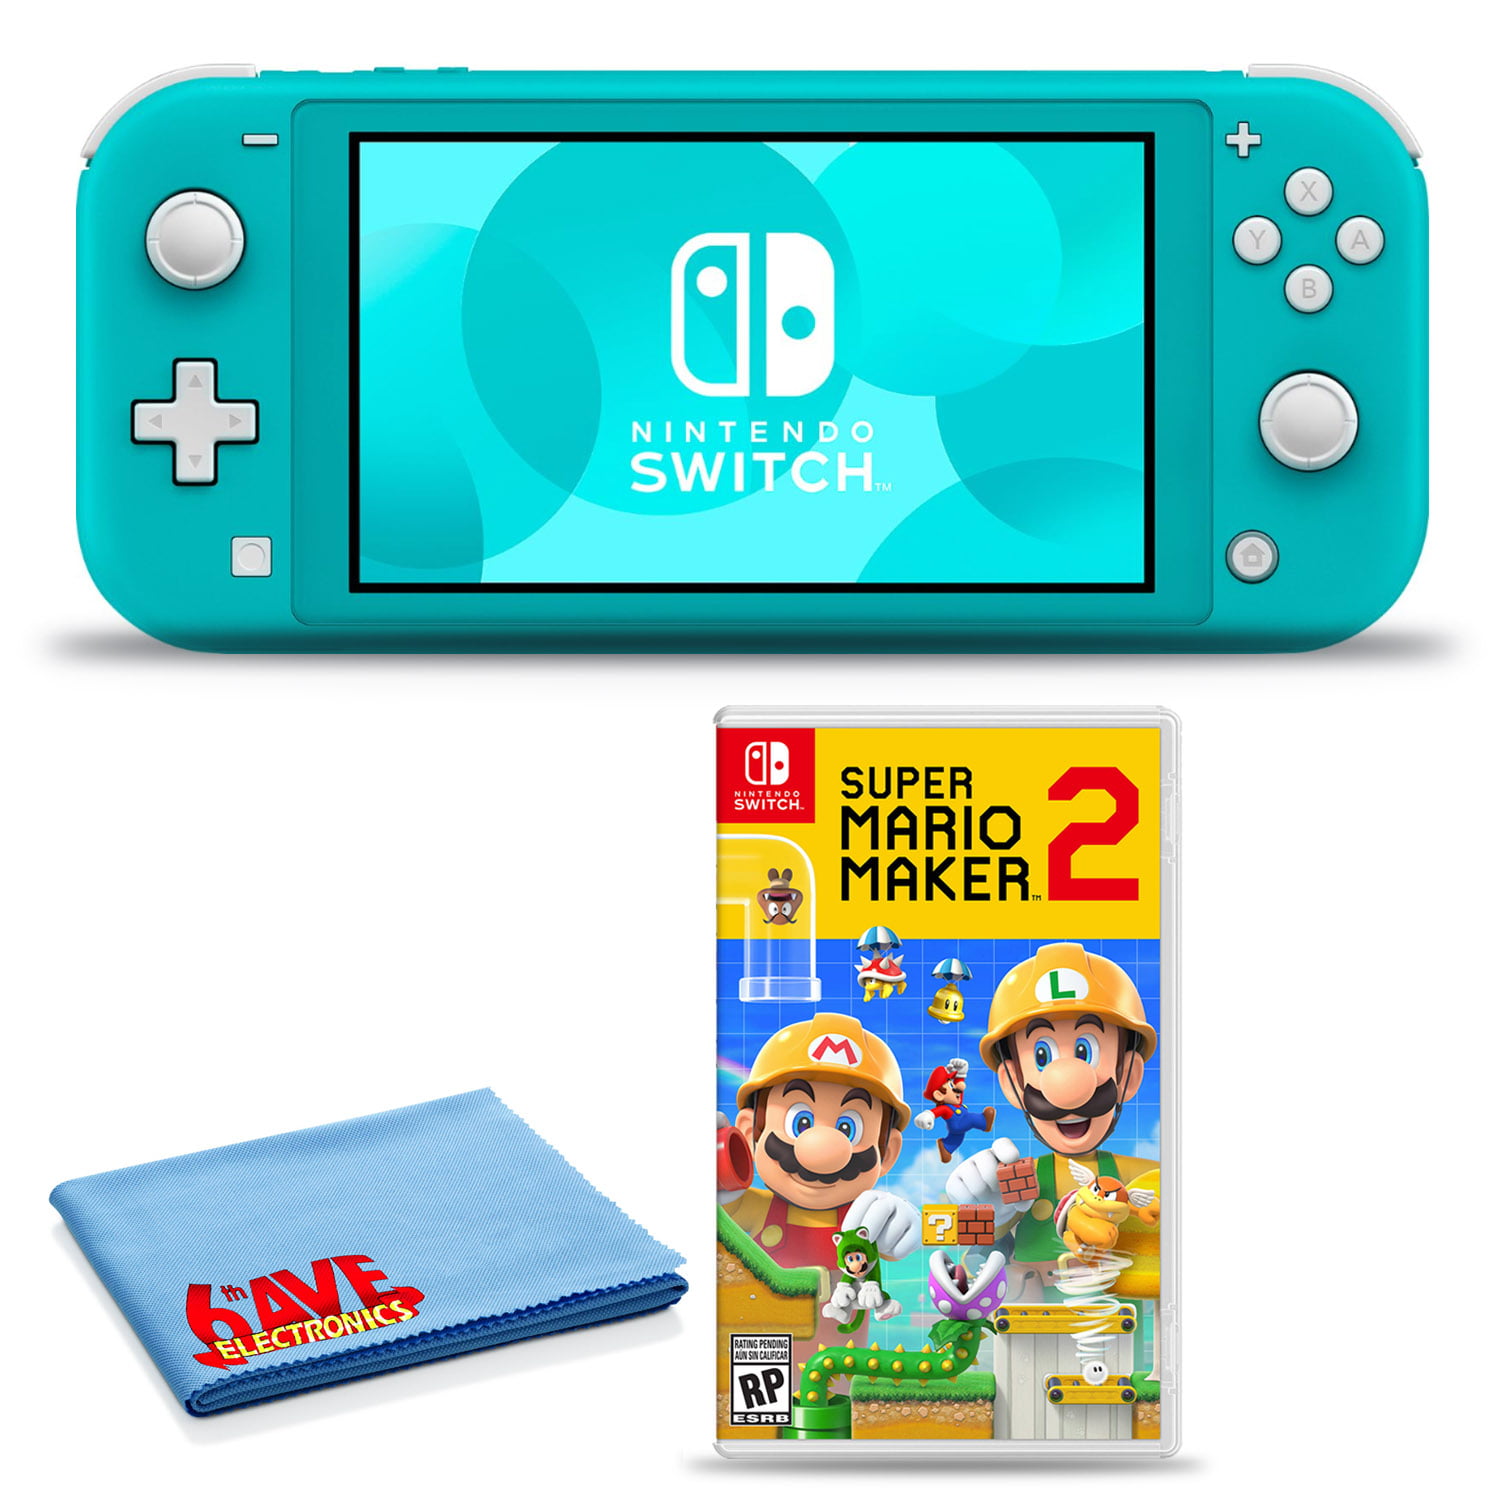 Nintendo Switch Lite (Turquoise) Bundle with 6Ave Cleaning Cloth + 